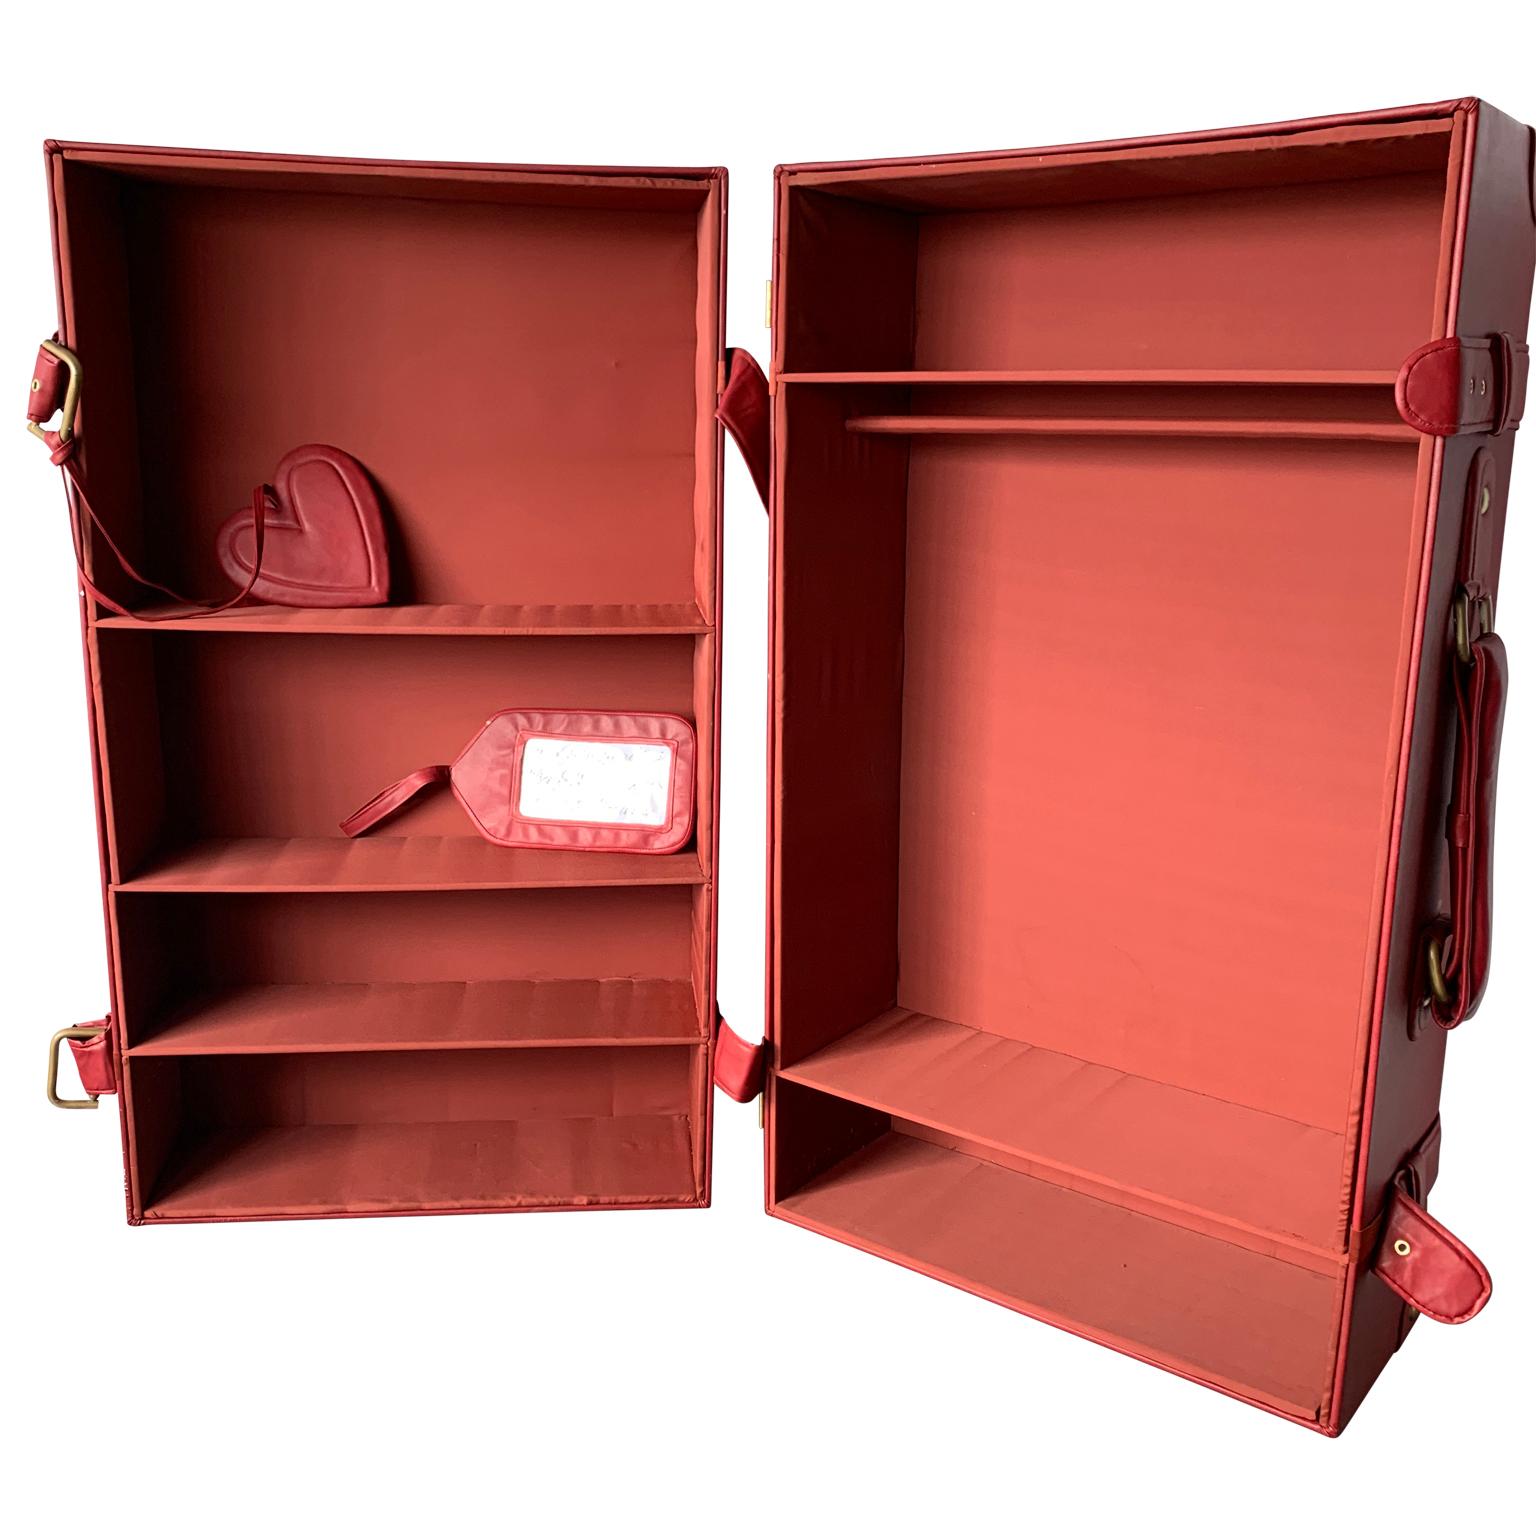 Rare vintage suitcase wardrobe in thick red leather by Moschino from their 2013 Milan flagship-store.
Inside walls, coatrack and shelves in upholstered red silk.
Hardware on handles and bracket are made of gilded Lucite, that has some repair to